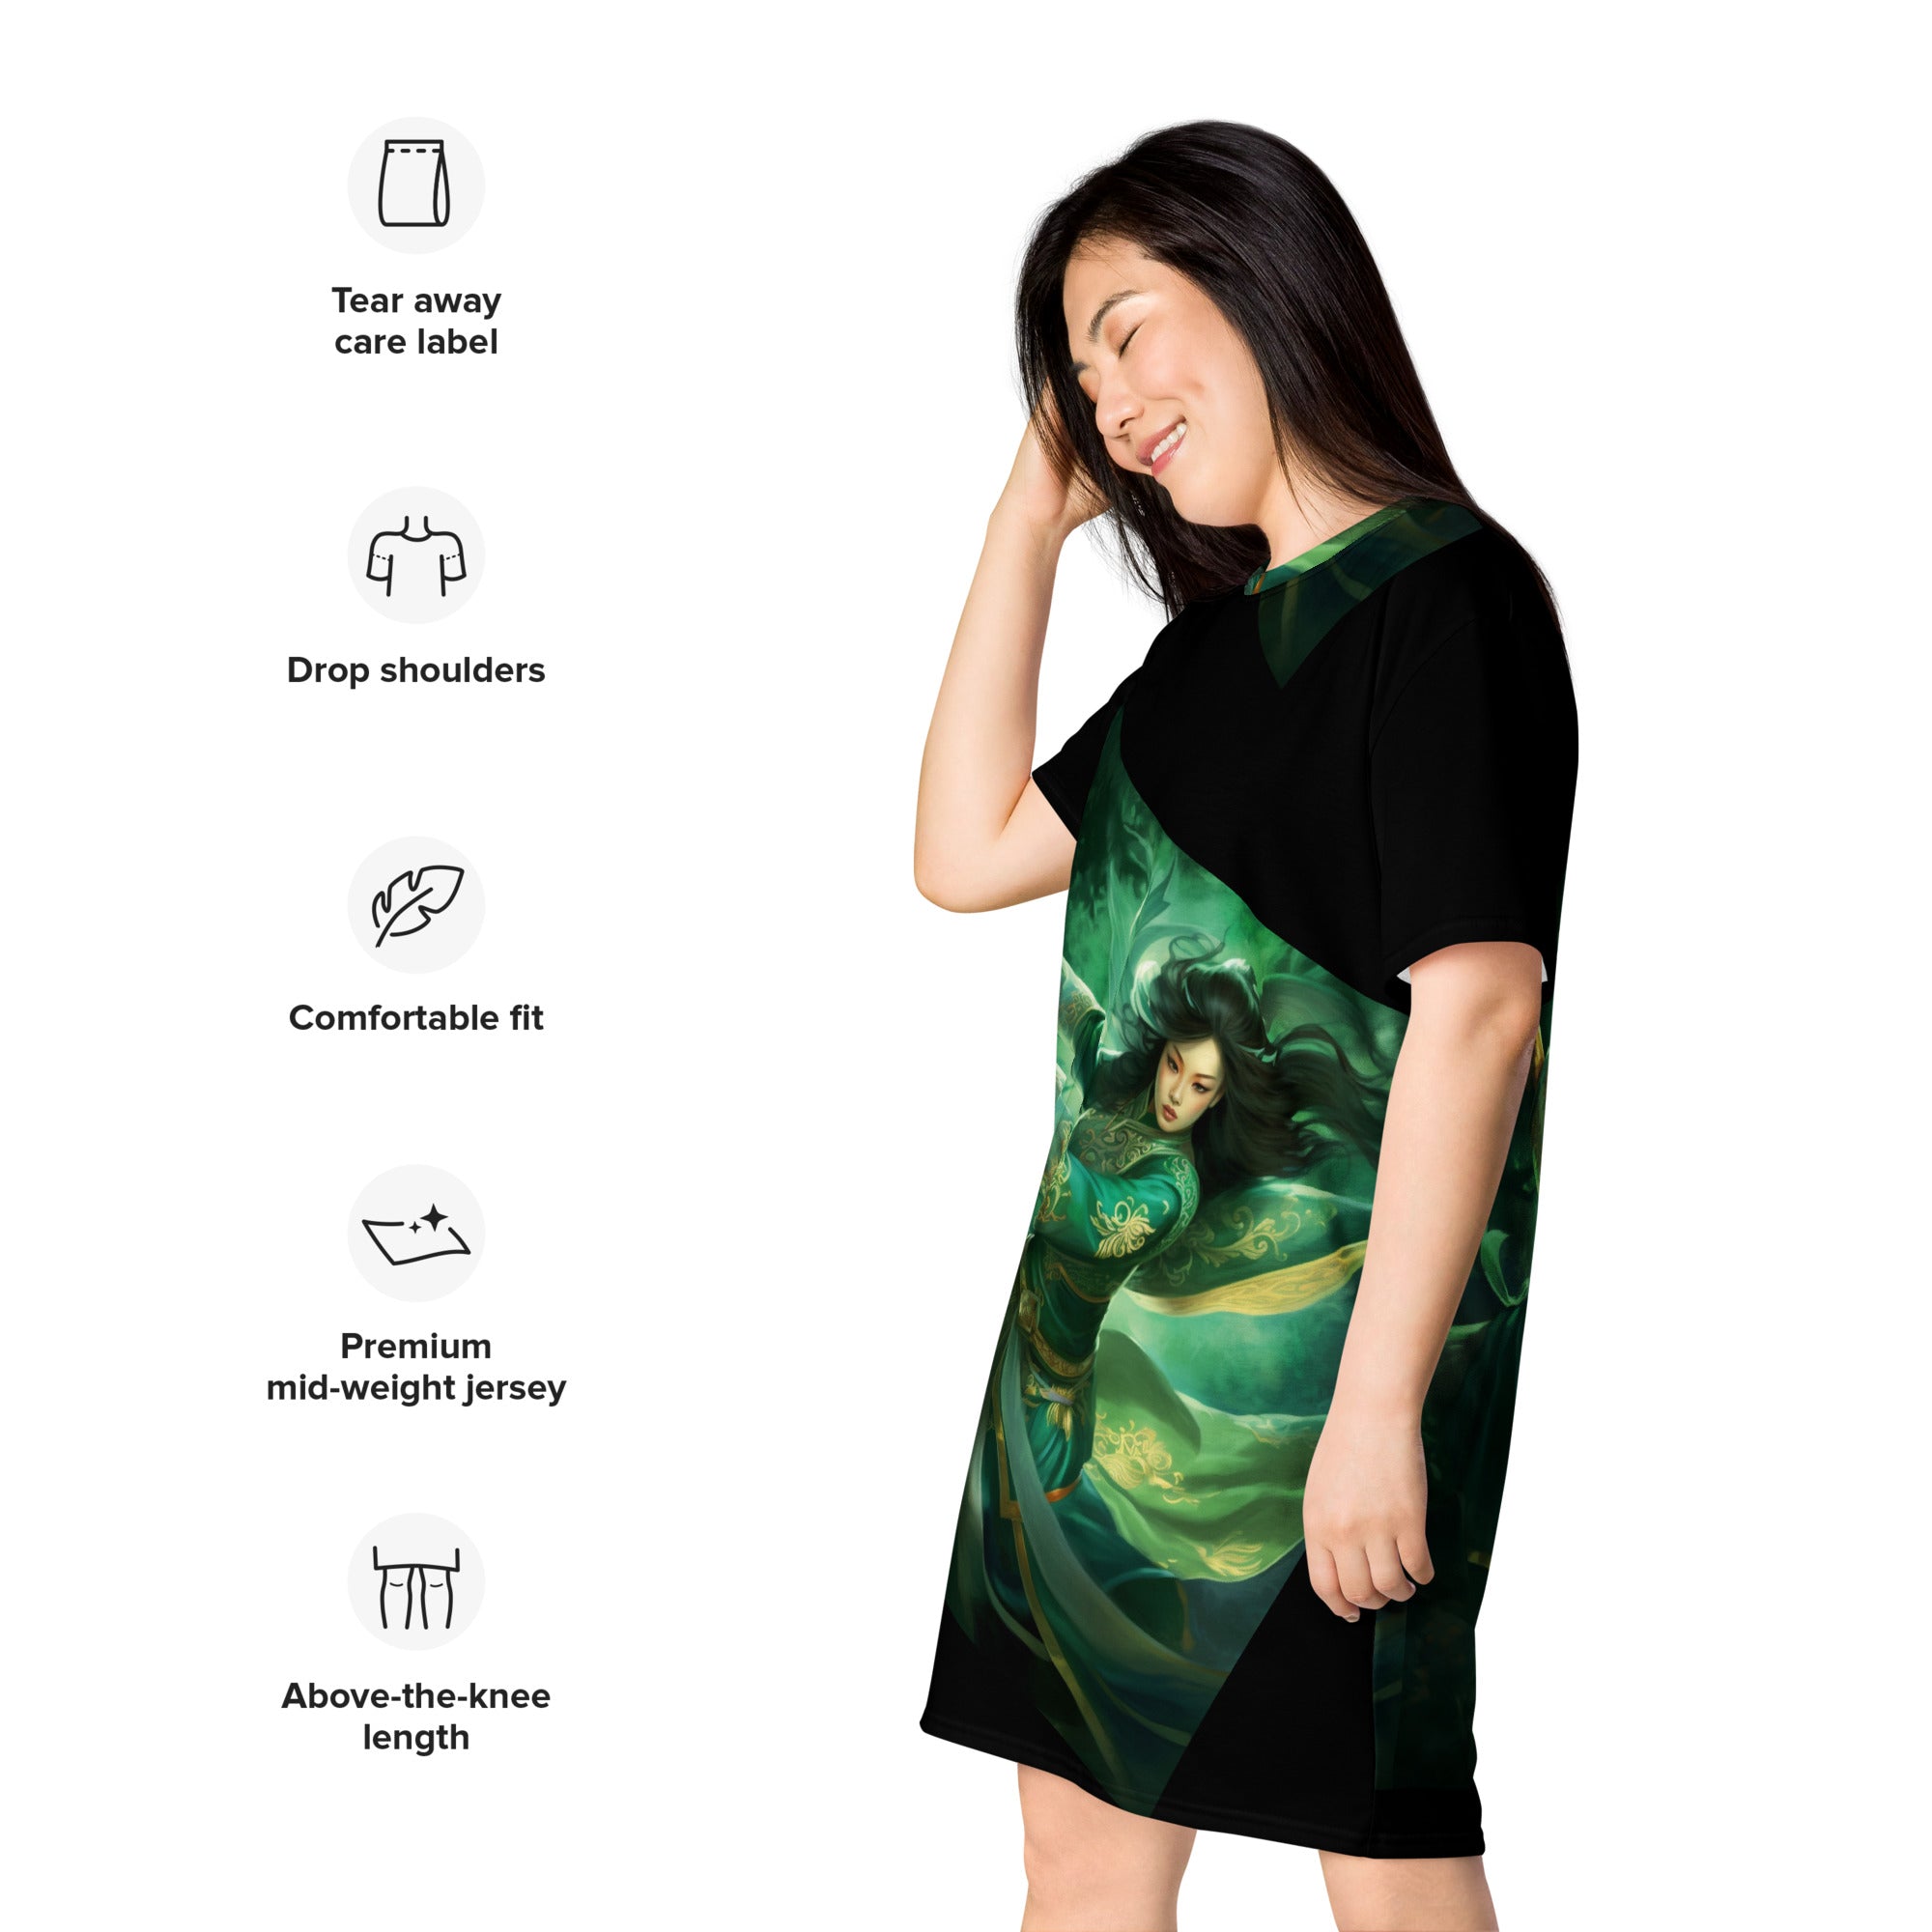 Empowered by Legends: Hua Mulan Chinese Fairy Style T-Shirt Dress